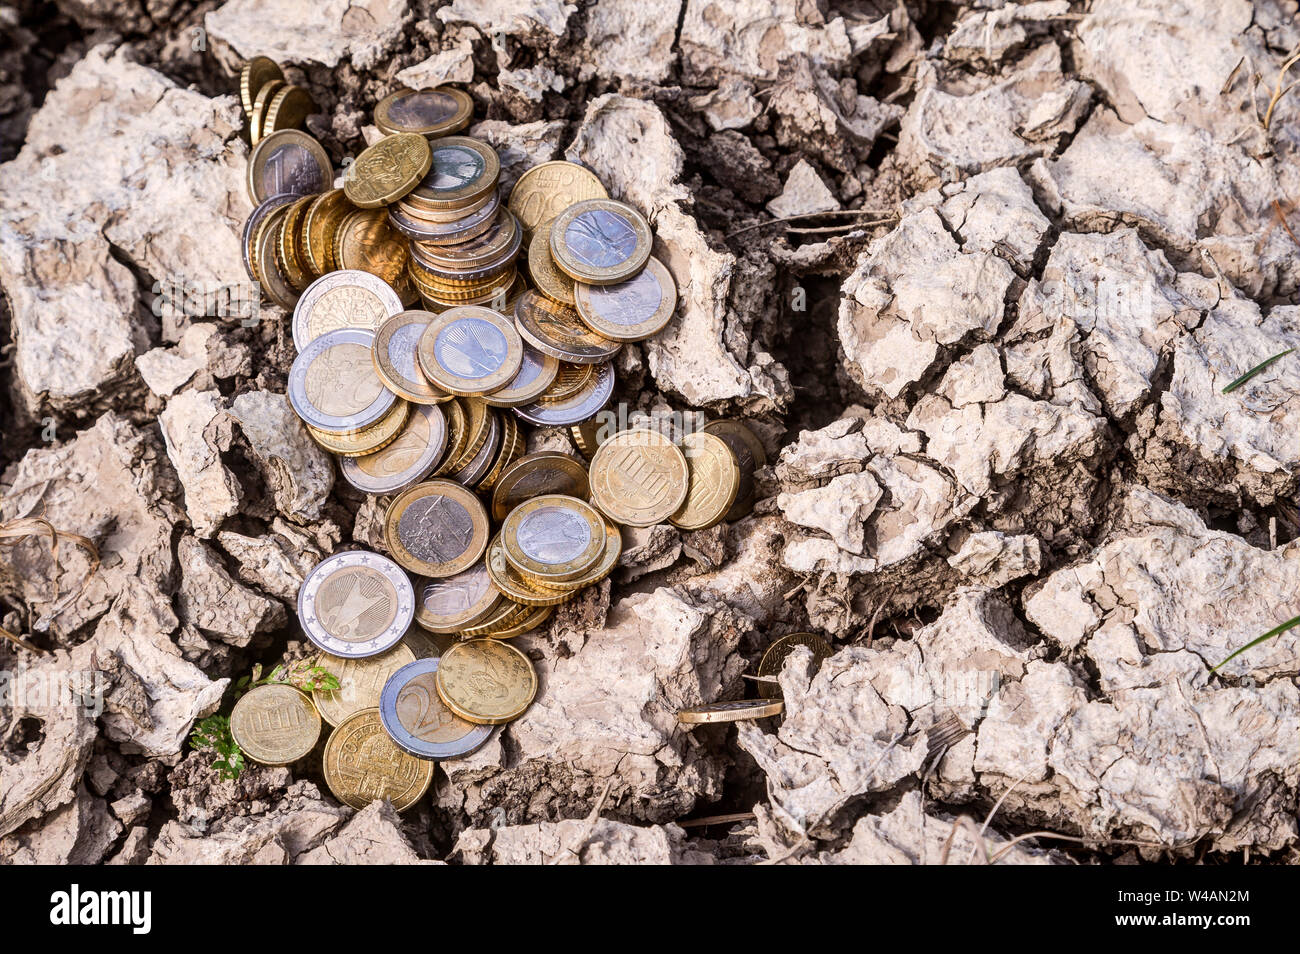 How much does climate change cost? Climate change leads to extreme weather events which cause considerable economic damage. A heap of euro coins lie o Stock Photo